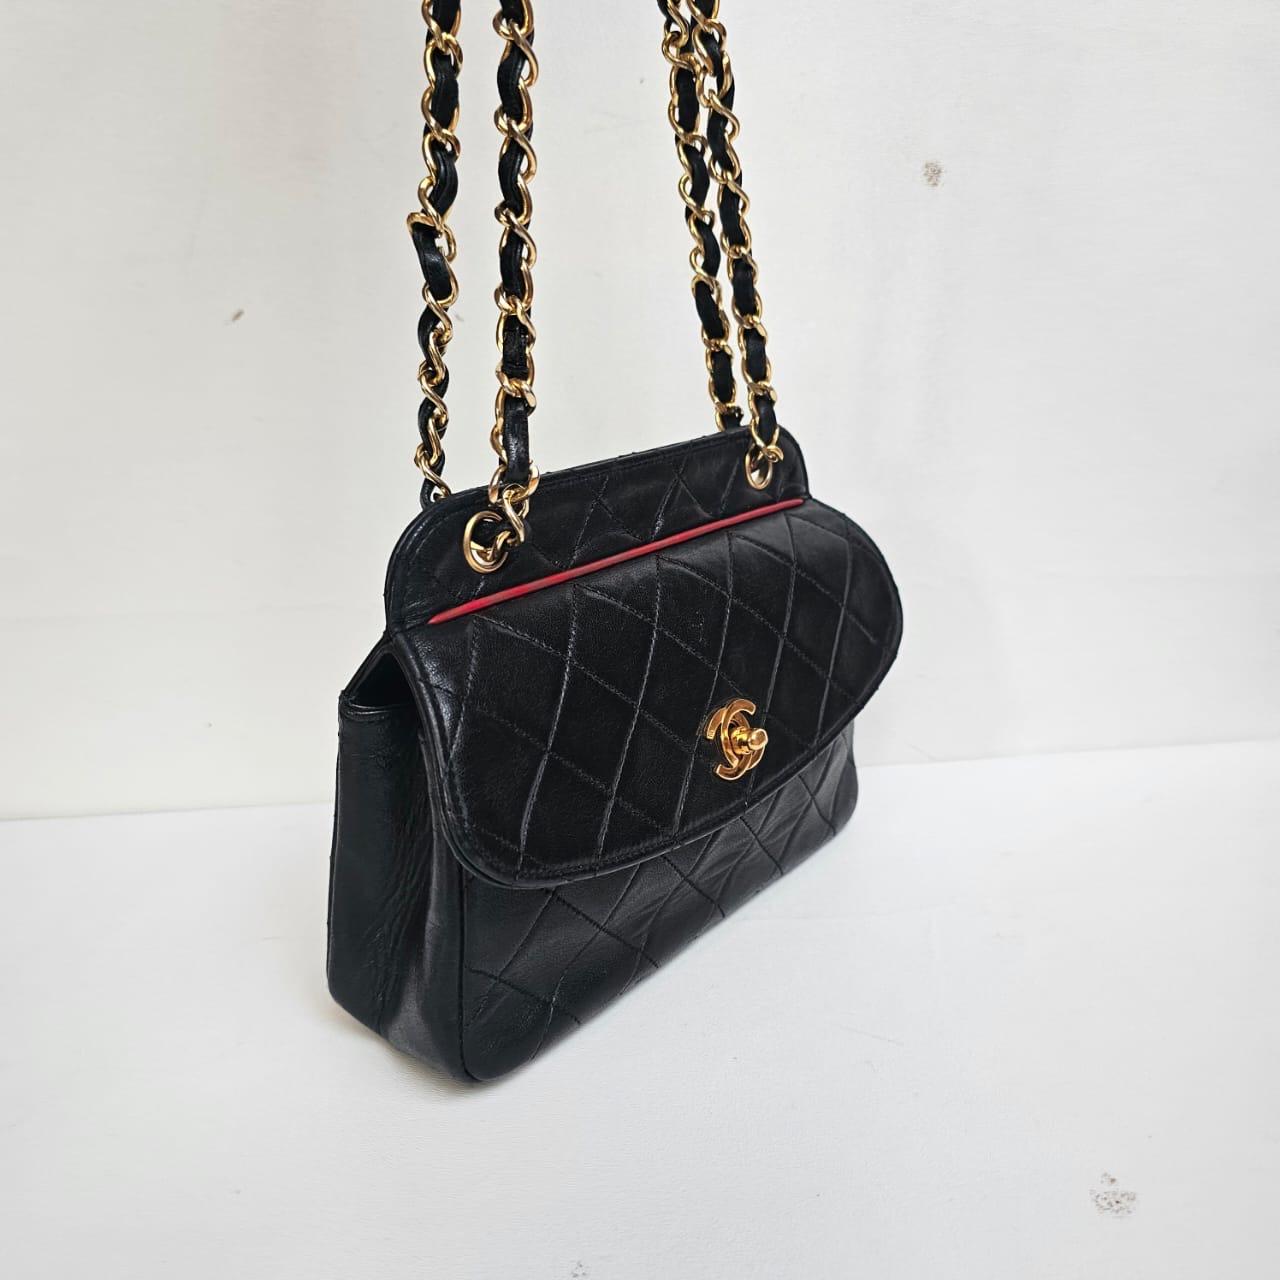 Vintage Chanel Black Lambskin Quilted Mini Flap Bag For Sale 2